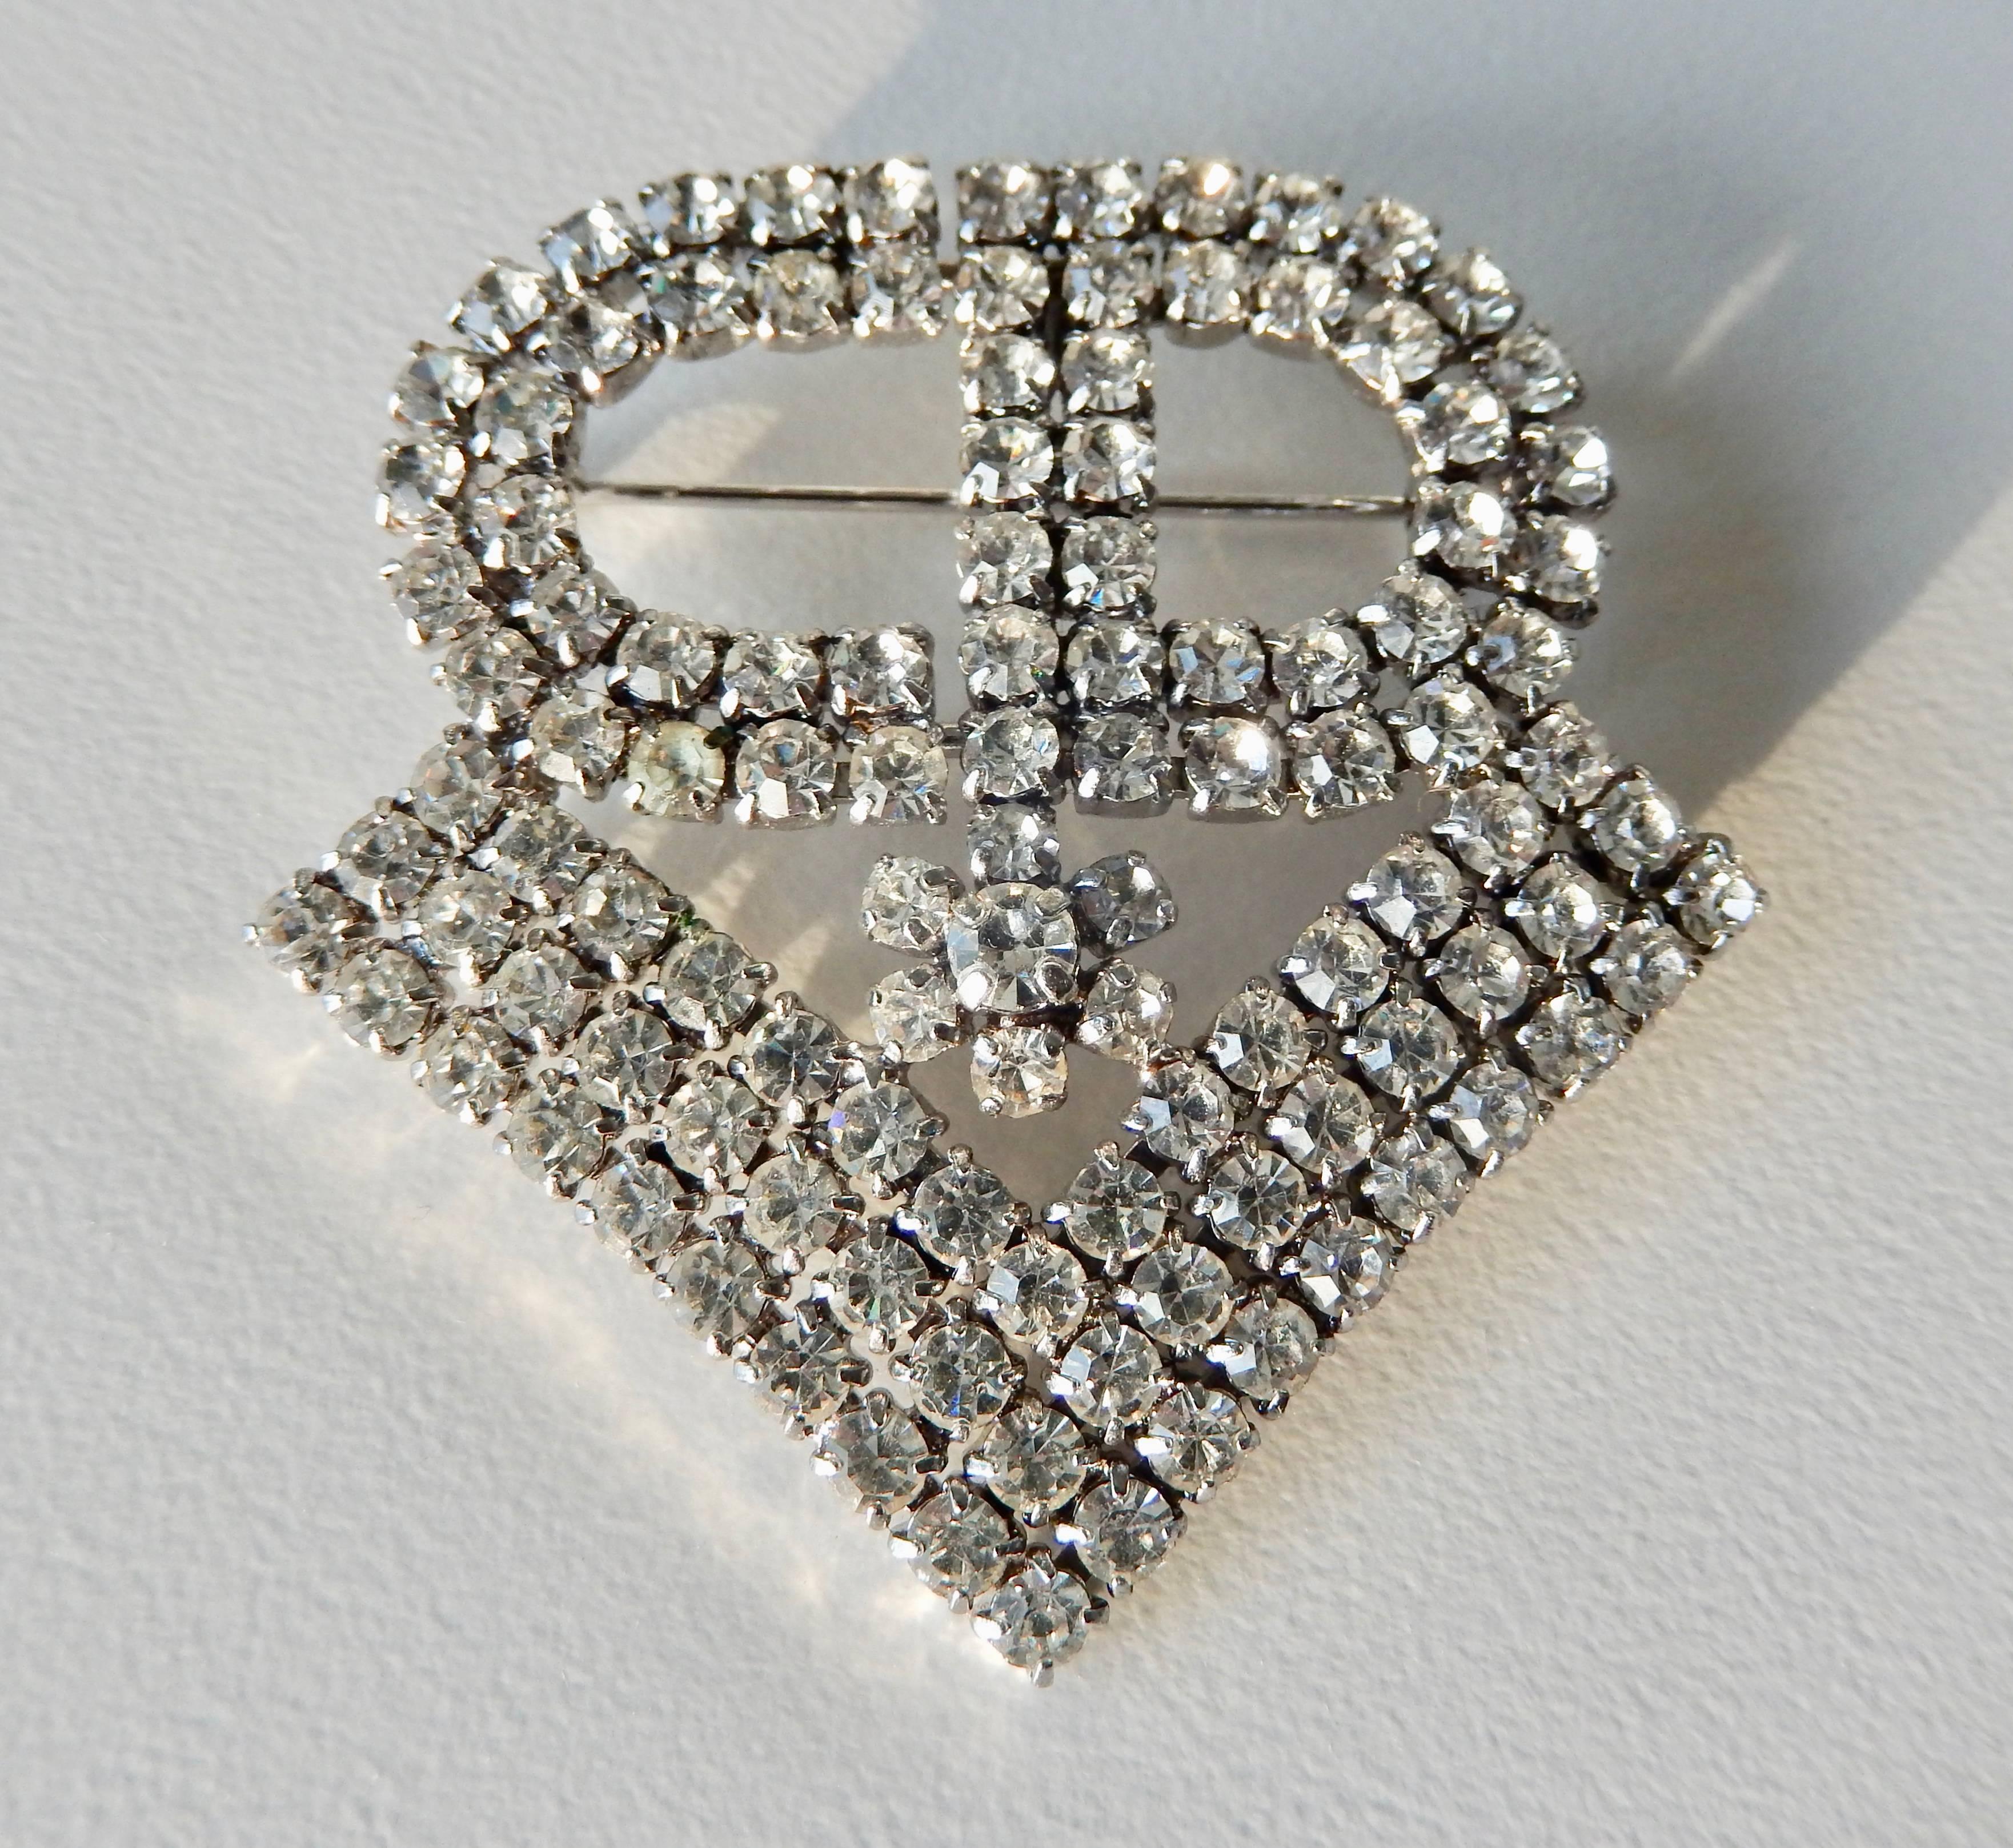 A chic rhinestone brooch by Christian Dior, dated 1971, with an interesting insignia motif.  The initials 